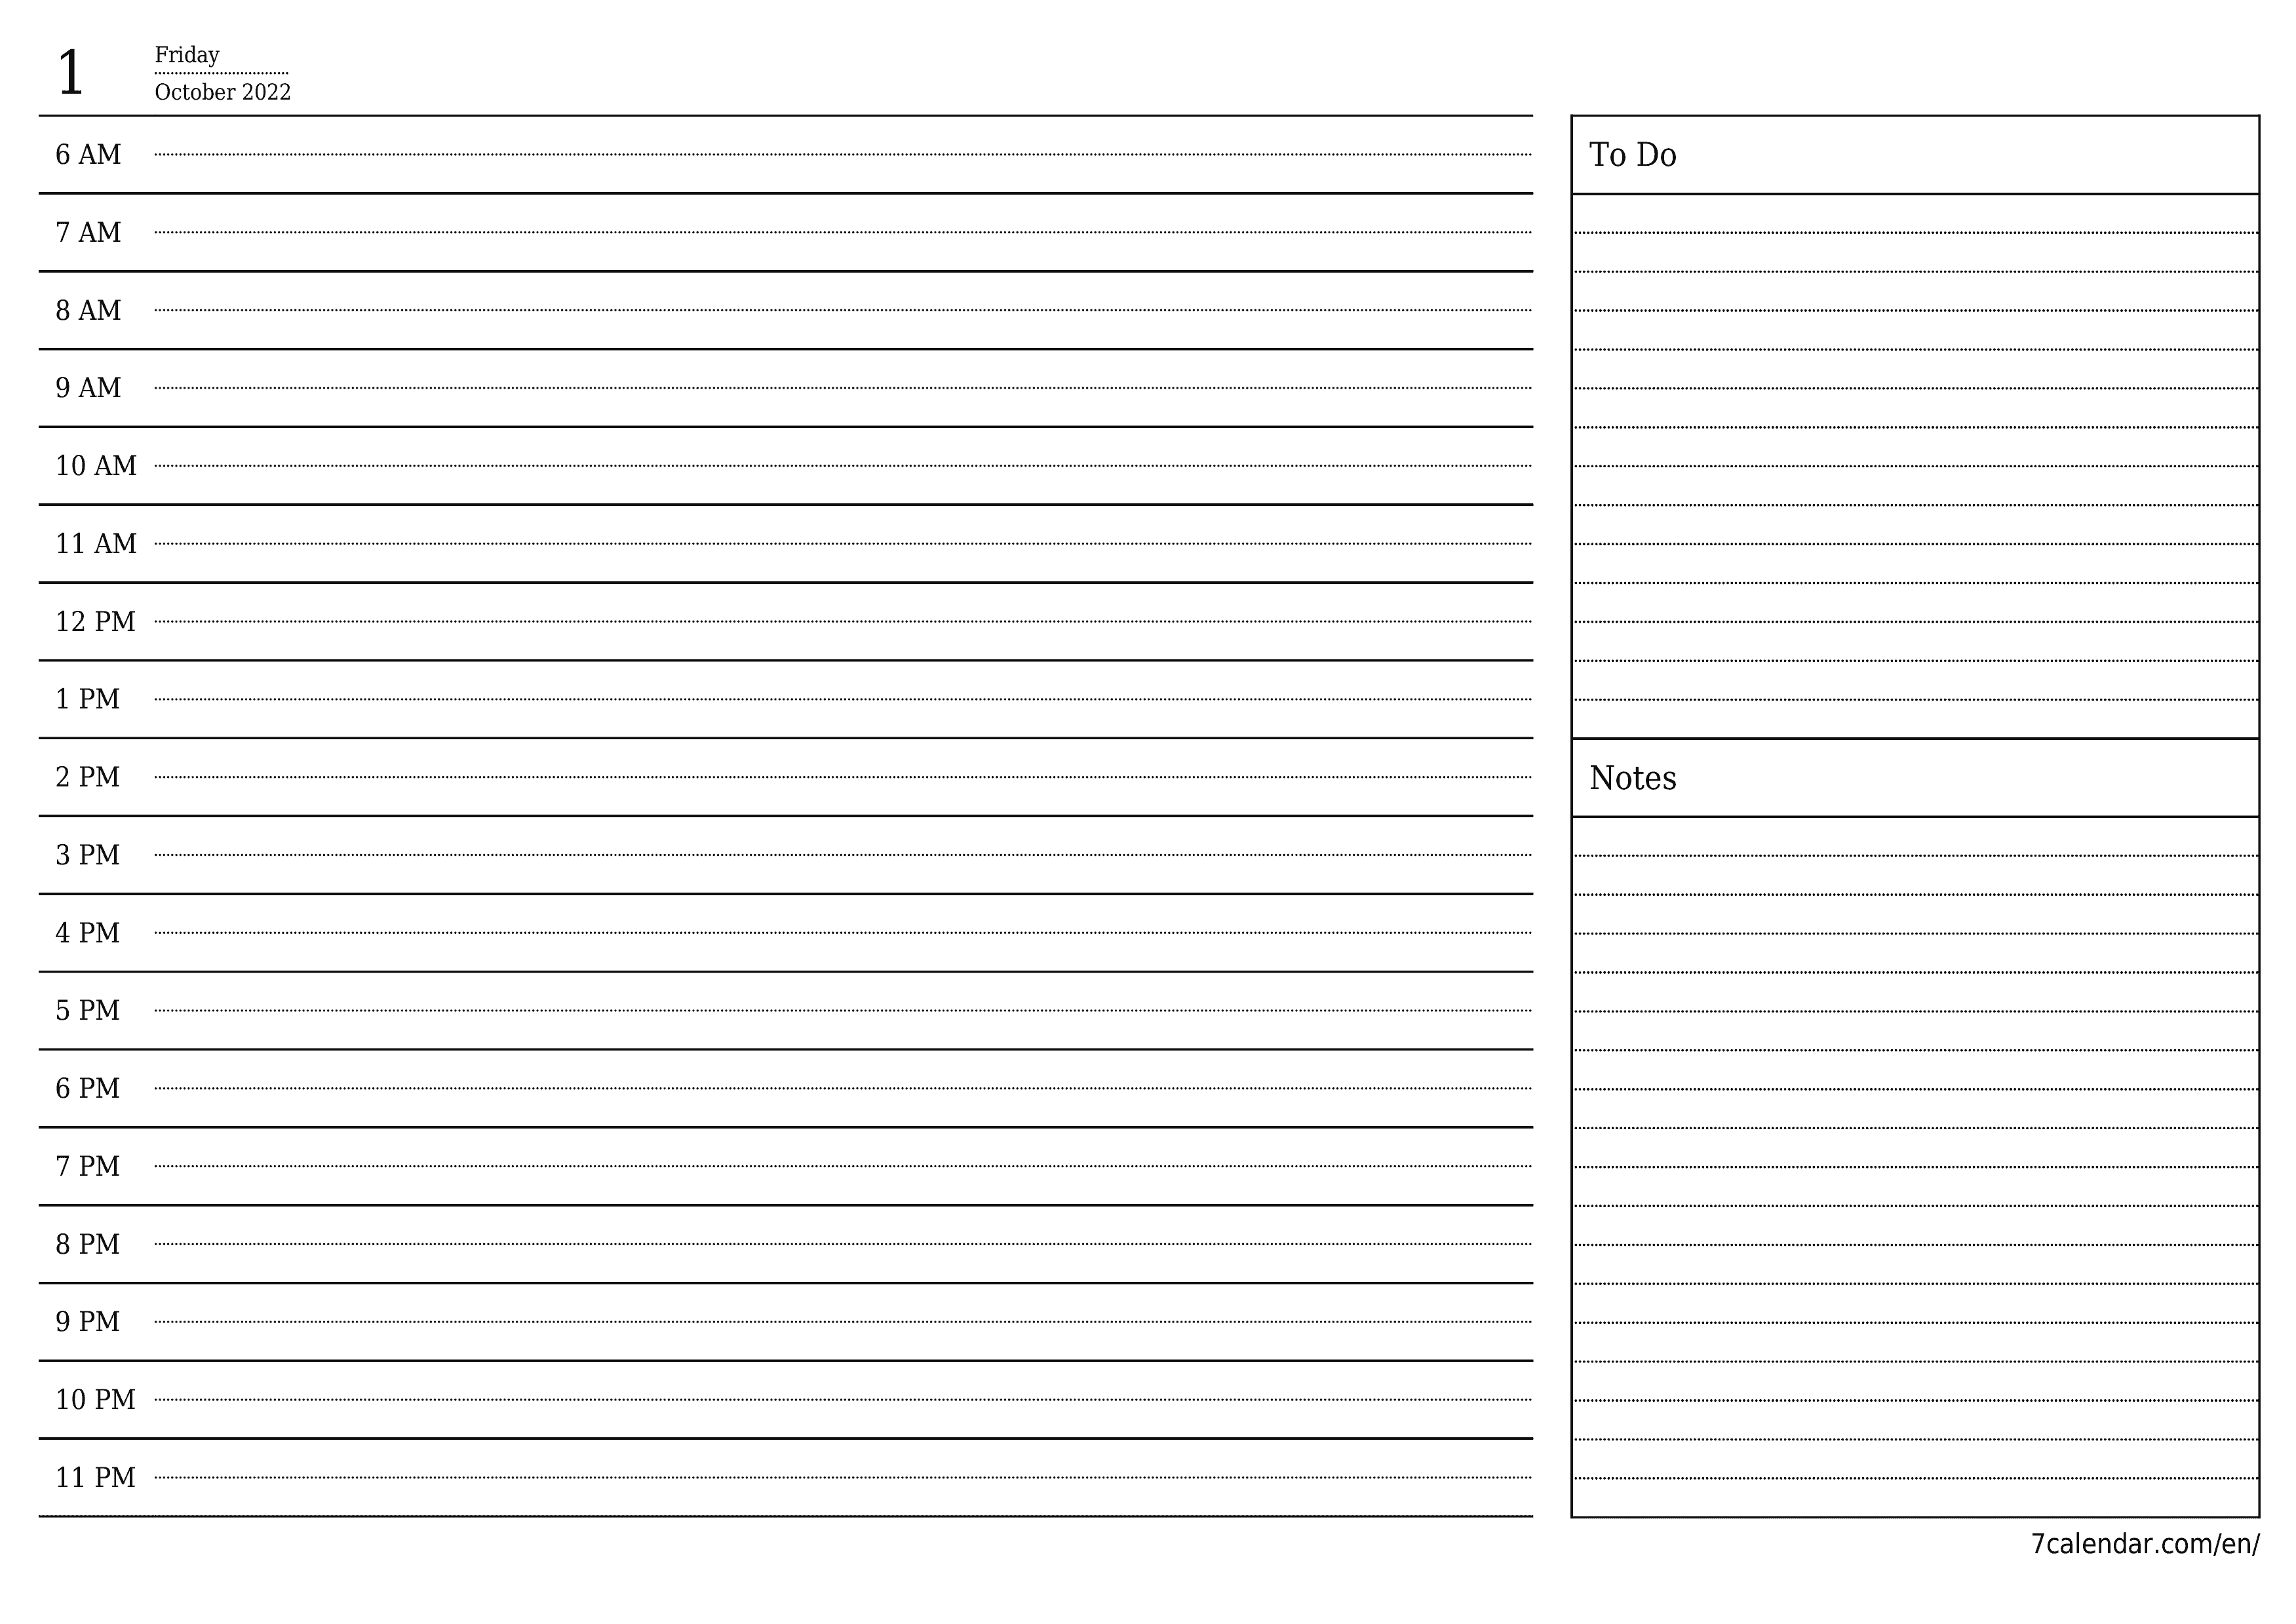 Blank daily printable calendar and planner for day October 2022 with notes, save and print to PDF PNG English - 7calendar.com